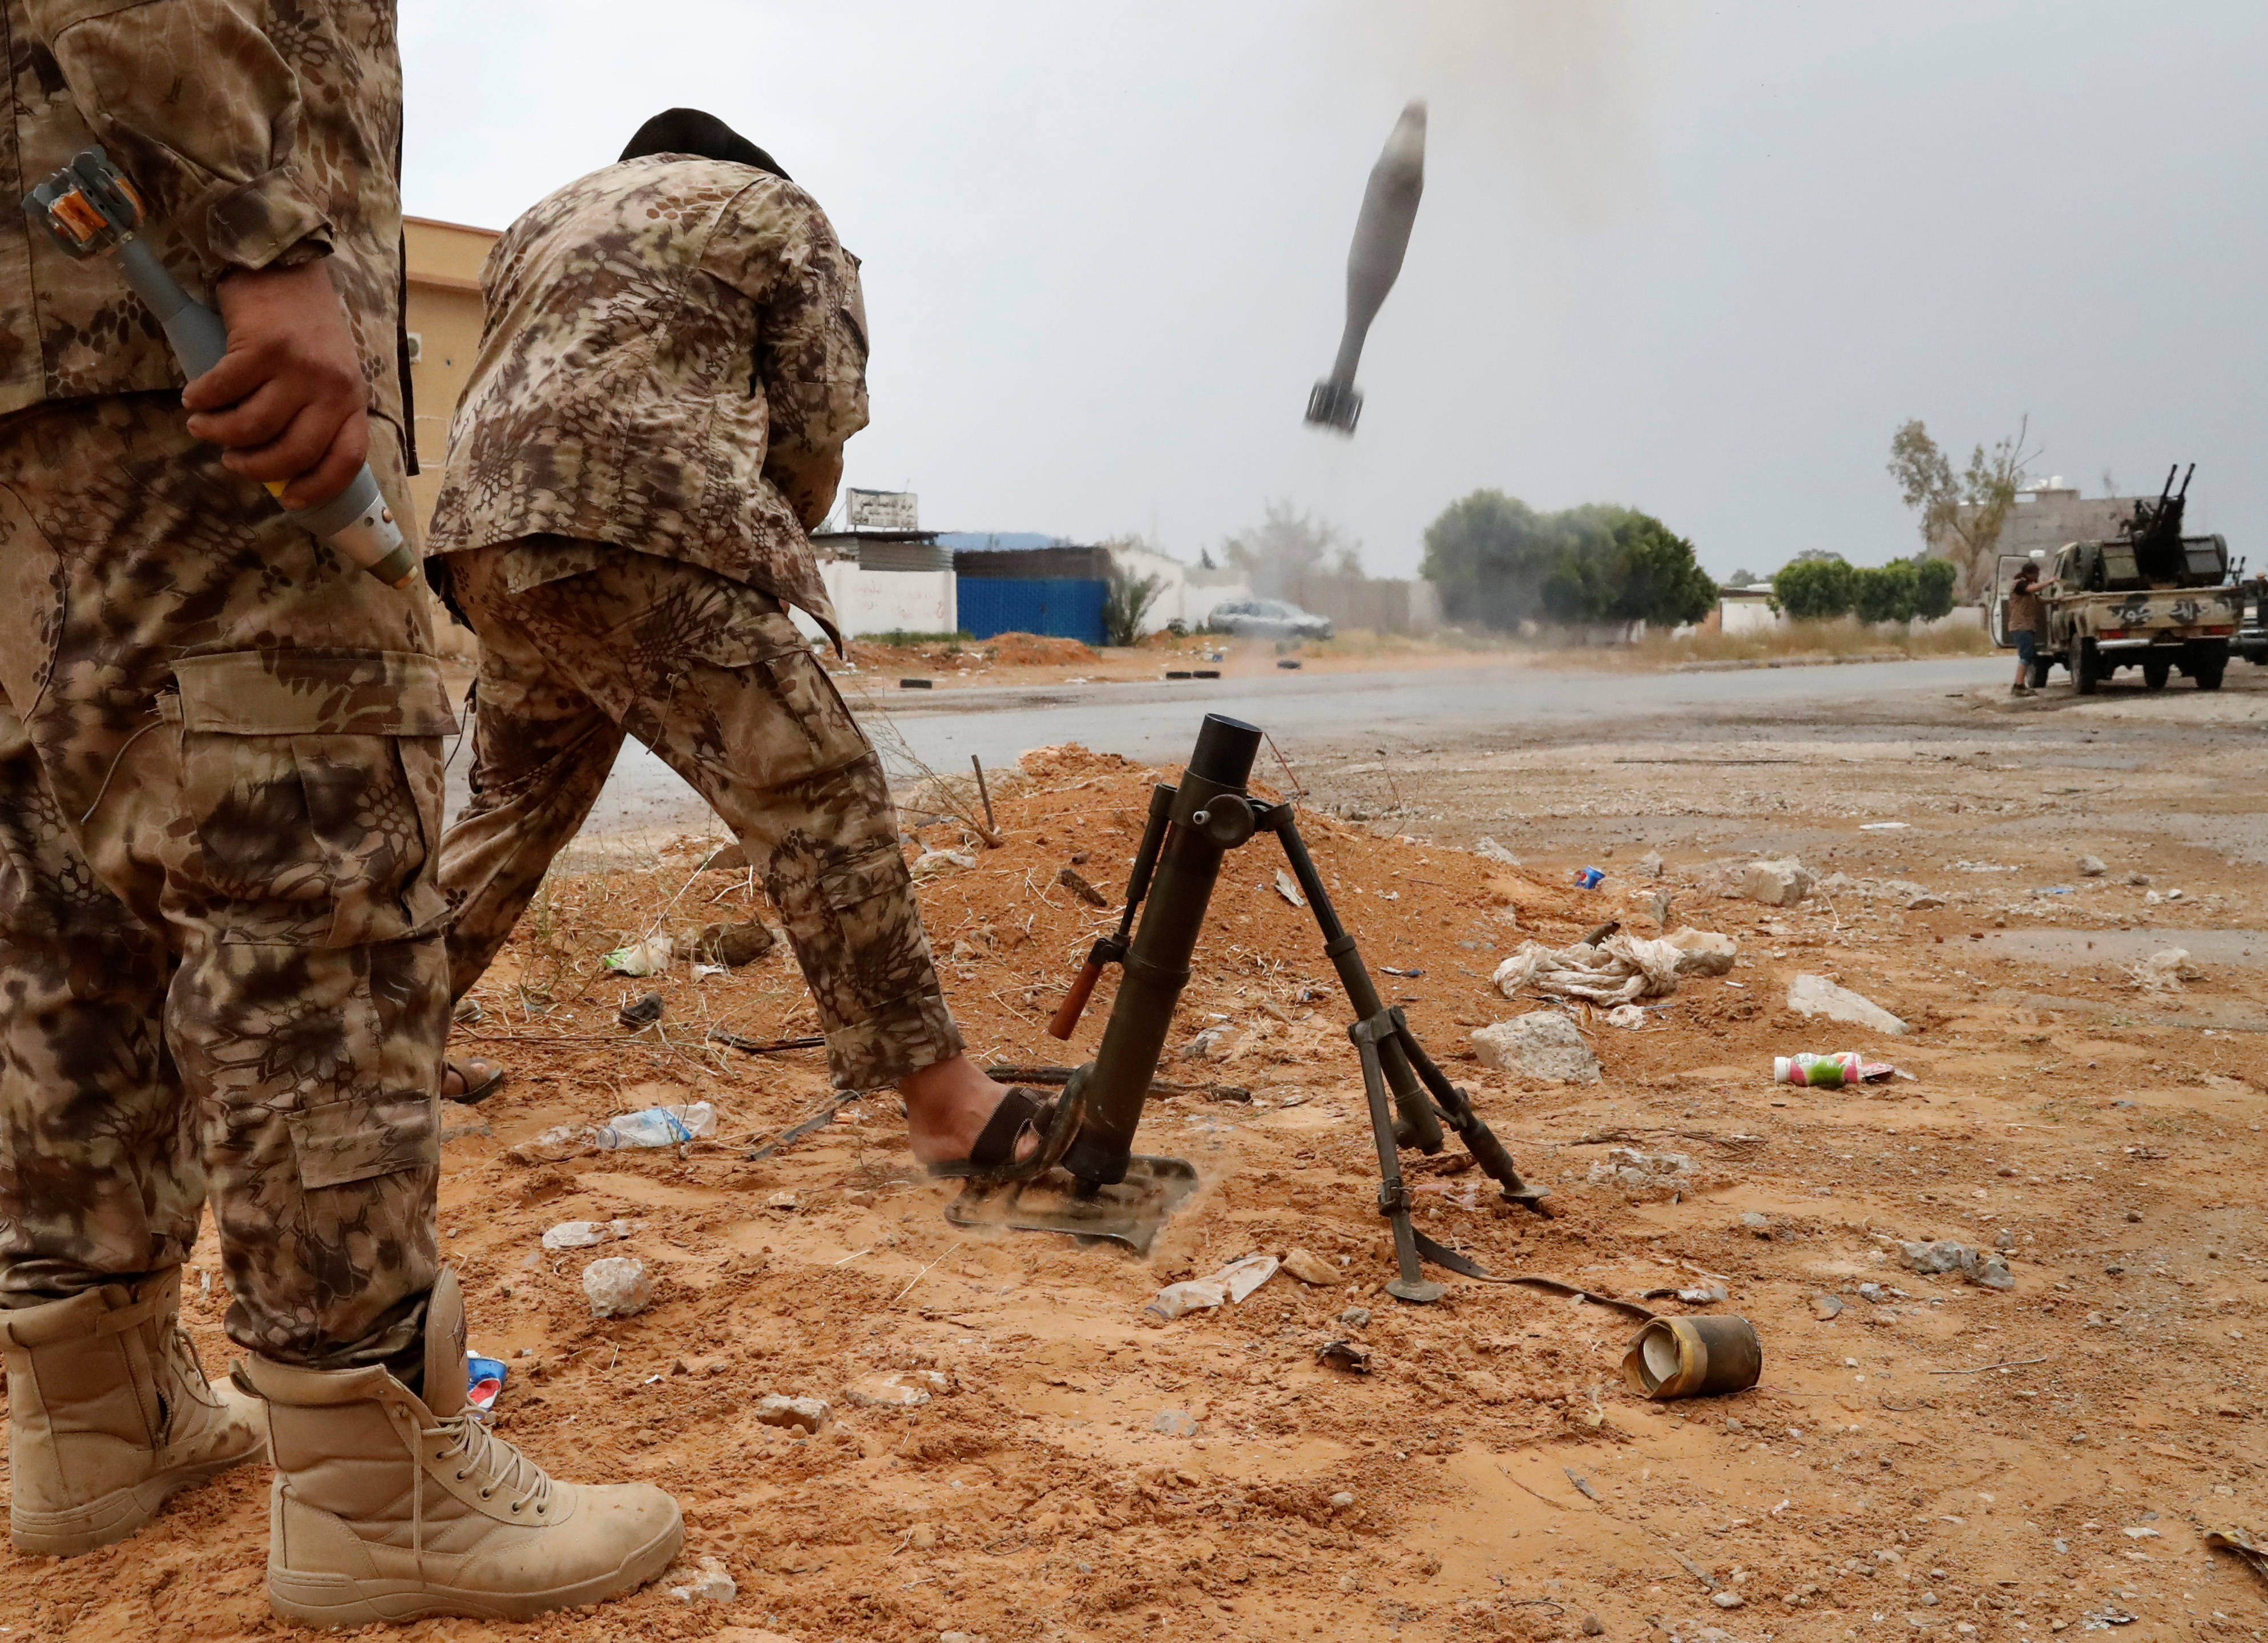 A fighter loyal to Libya's U.N.-backed government (GNA) fires a mortar during clashes with forces loyal to Khalifa Haftar on the outskirts of Tripoli